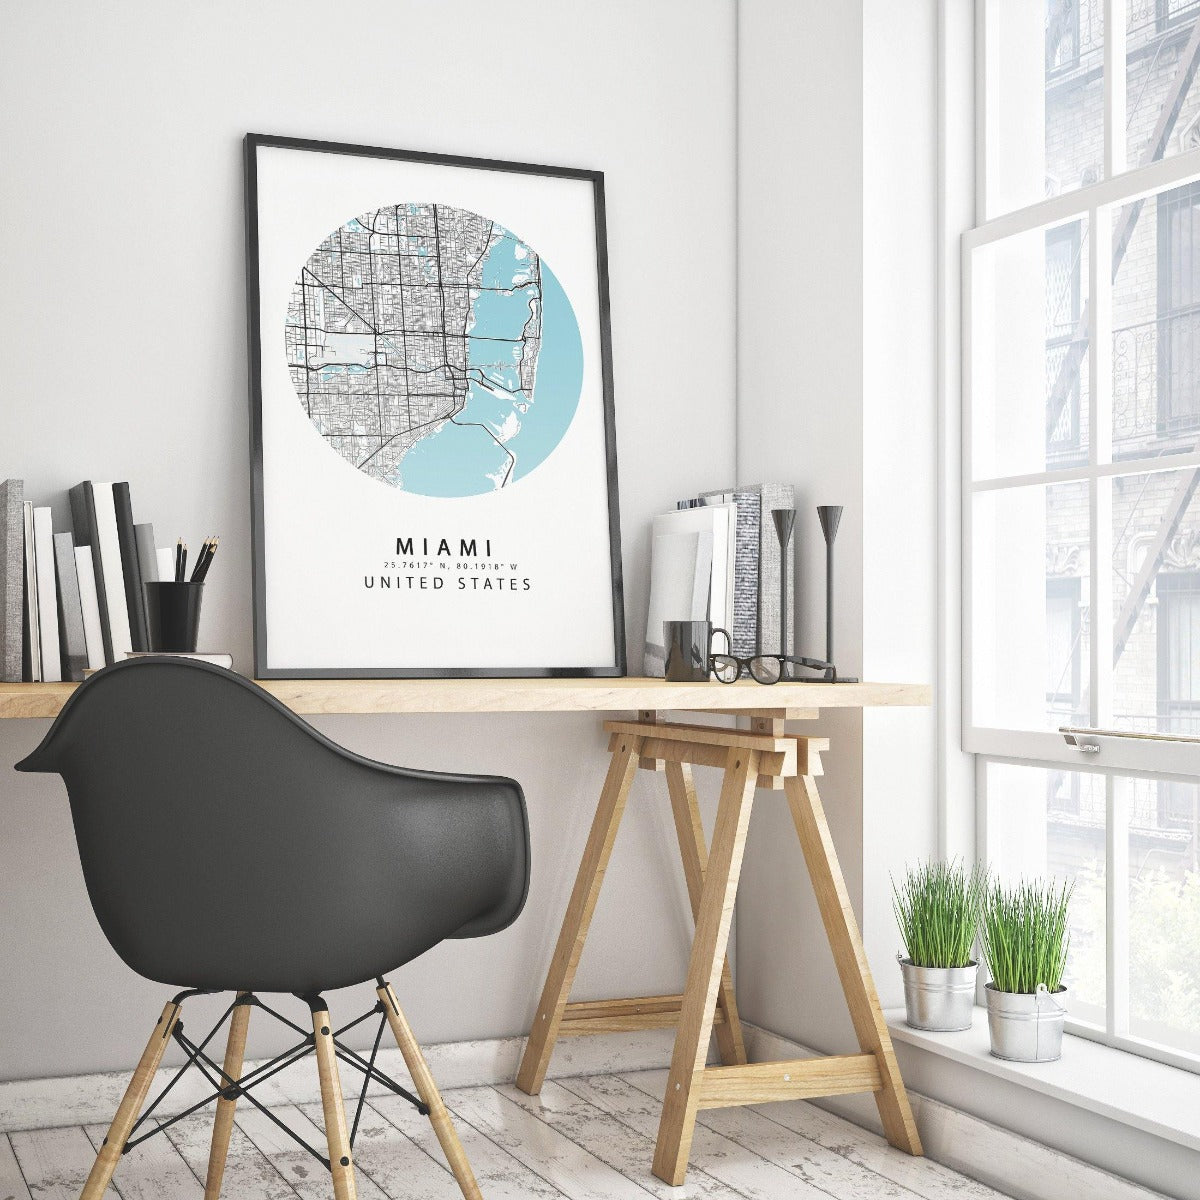 explore the best of Miami with this street map poster Printed on high quality paper, this poster size map is perfect for framing and makes a great addition to your home or office. With its vibrant colors and clear design, this map is a great way to explore Miami and see all that the city has to offer.